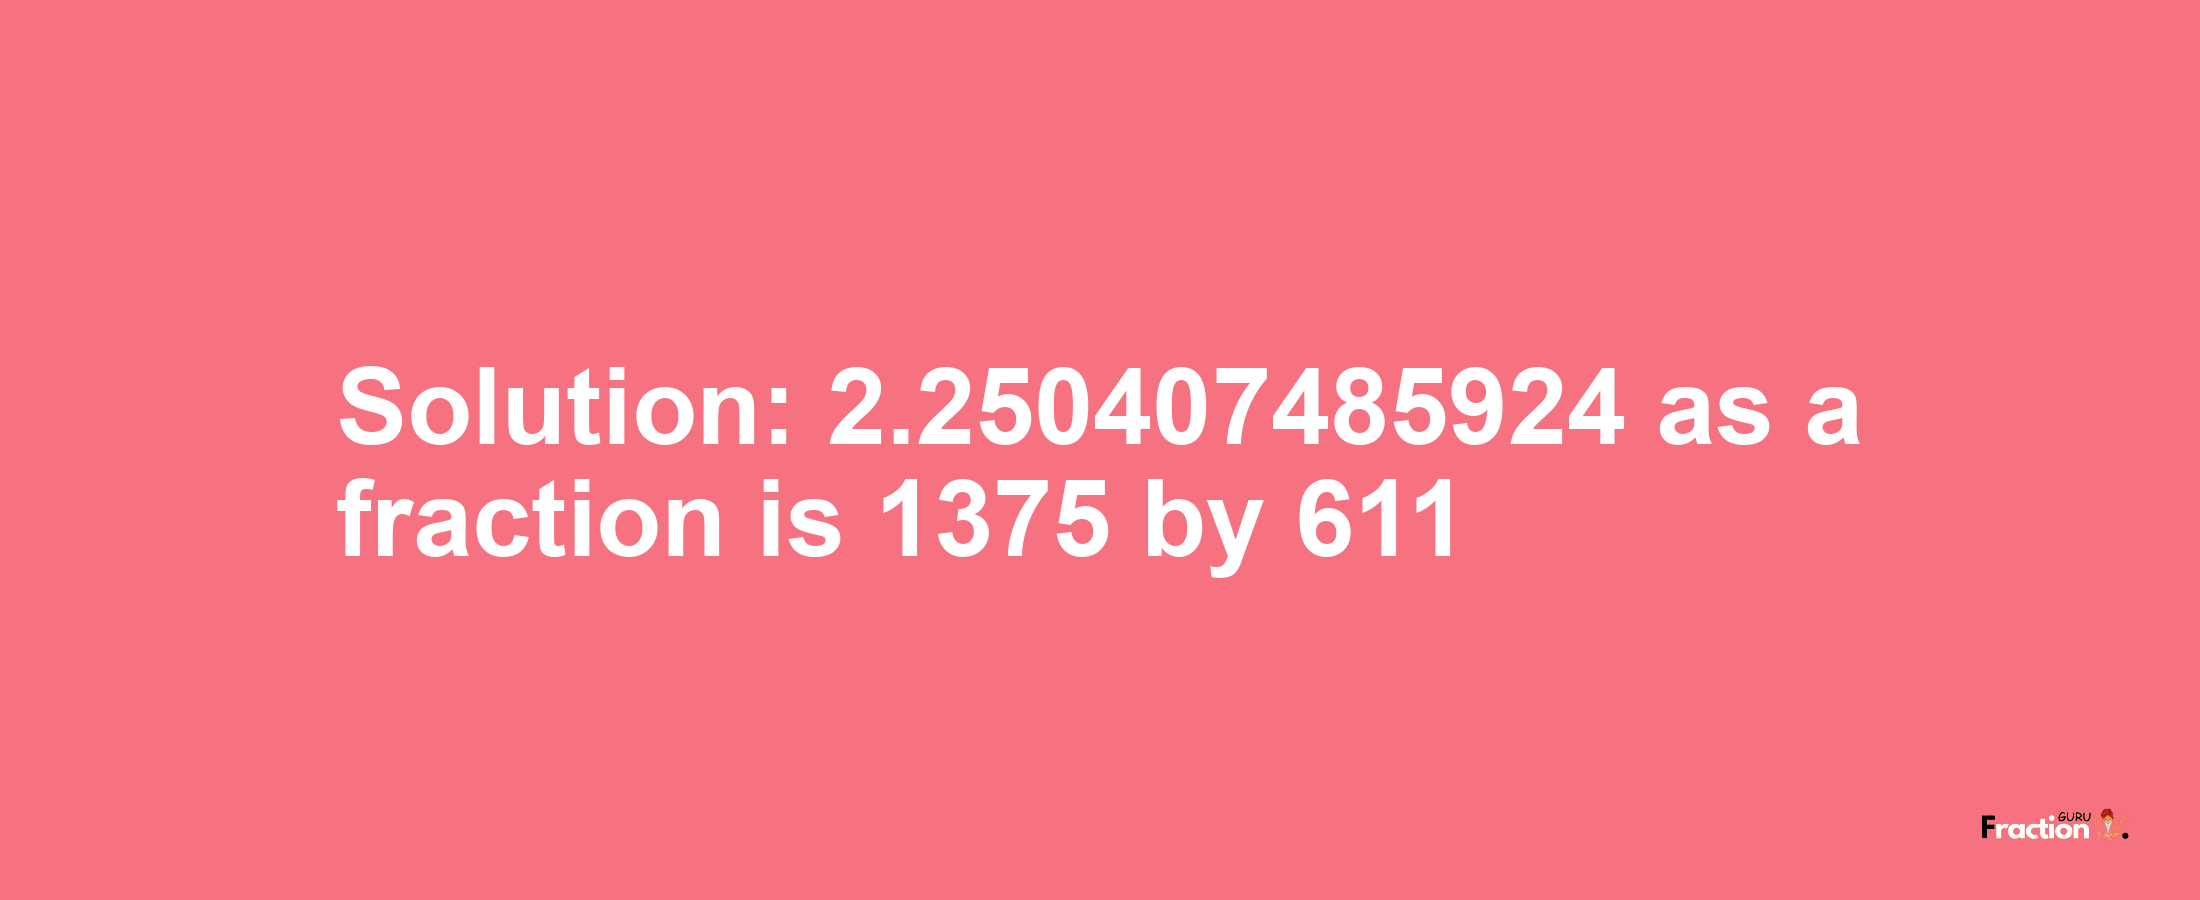 Solution:2.250407485924 as a fraction is 1375/611